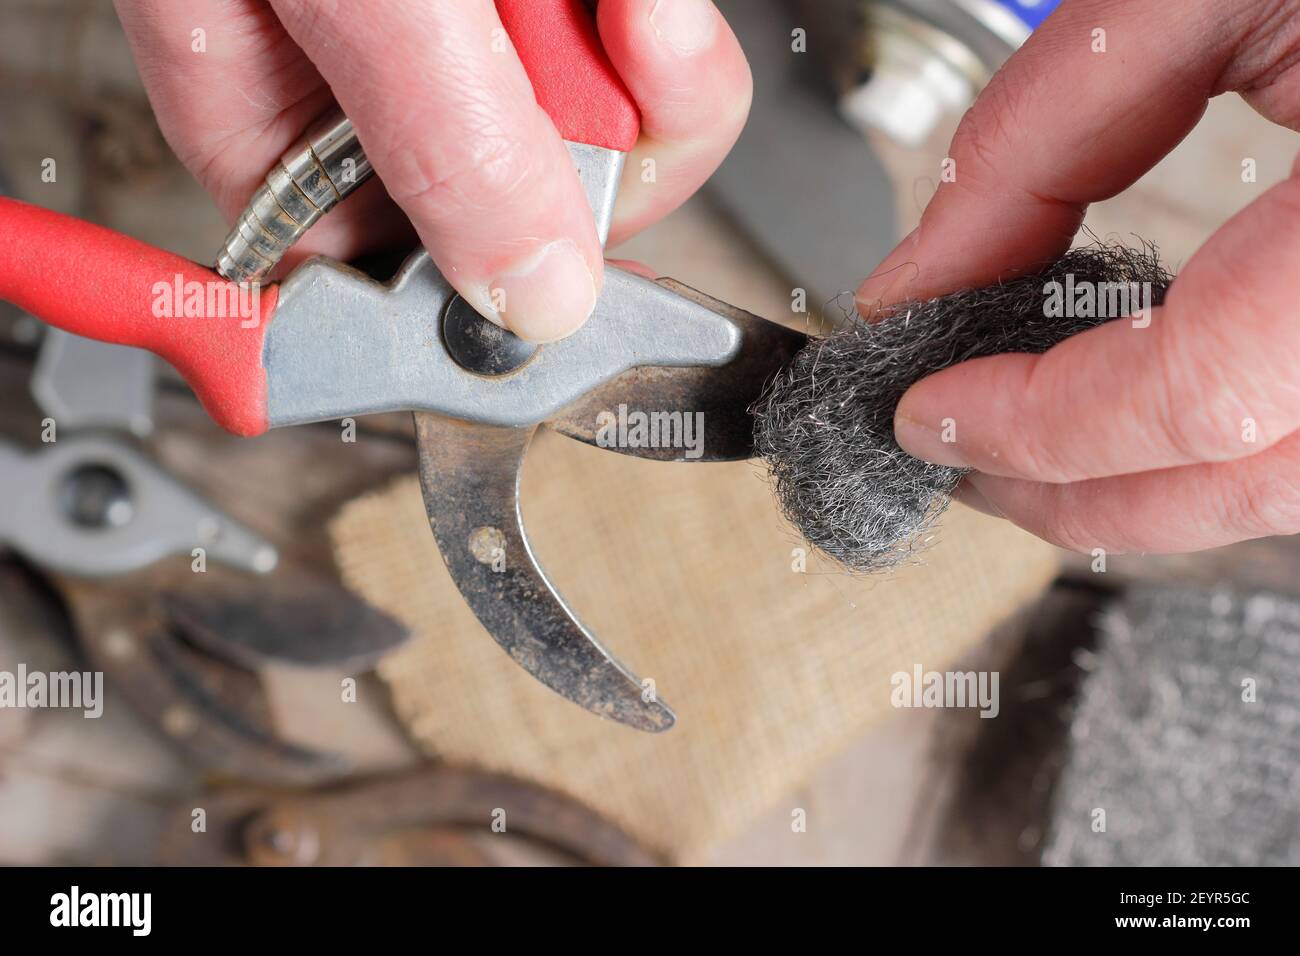 Cleaning garden secateurs with wire wool to help remove signs of rust and build up of plant and sap residue. Garden tool maintenance. Stock Photo